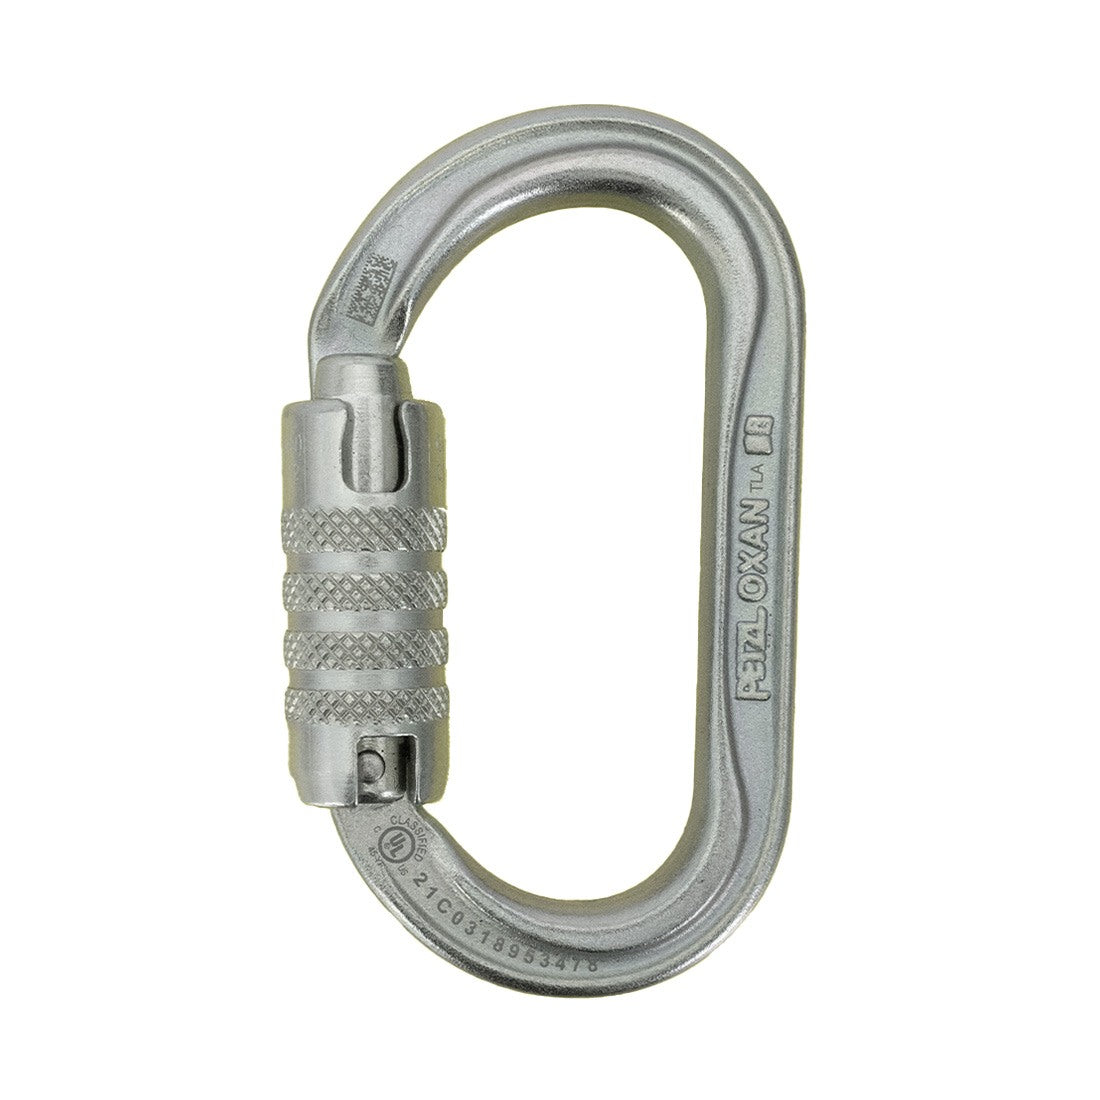 Strong Swivel Carabiner For Fabrication Possibilities 